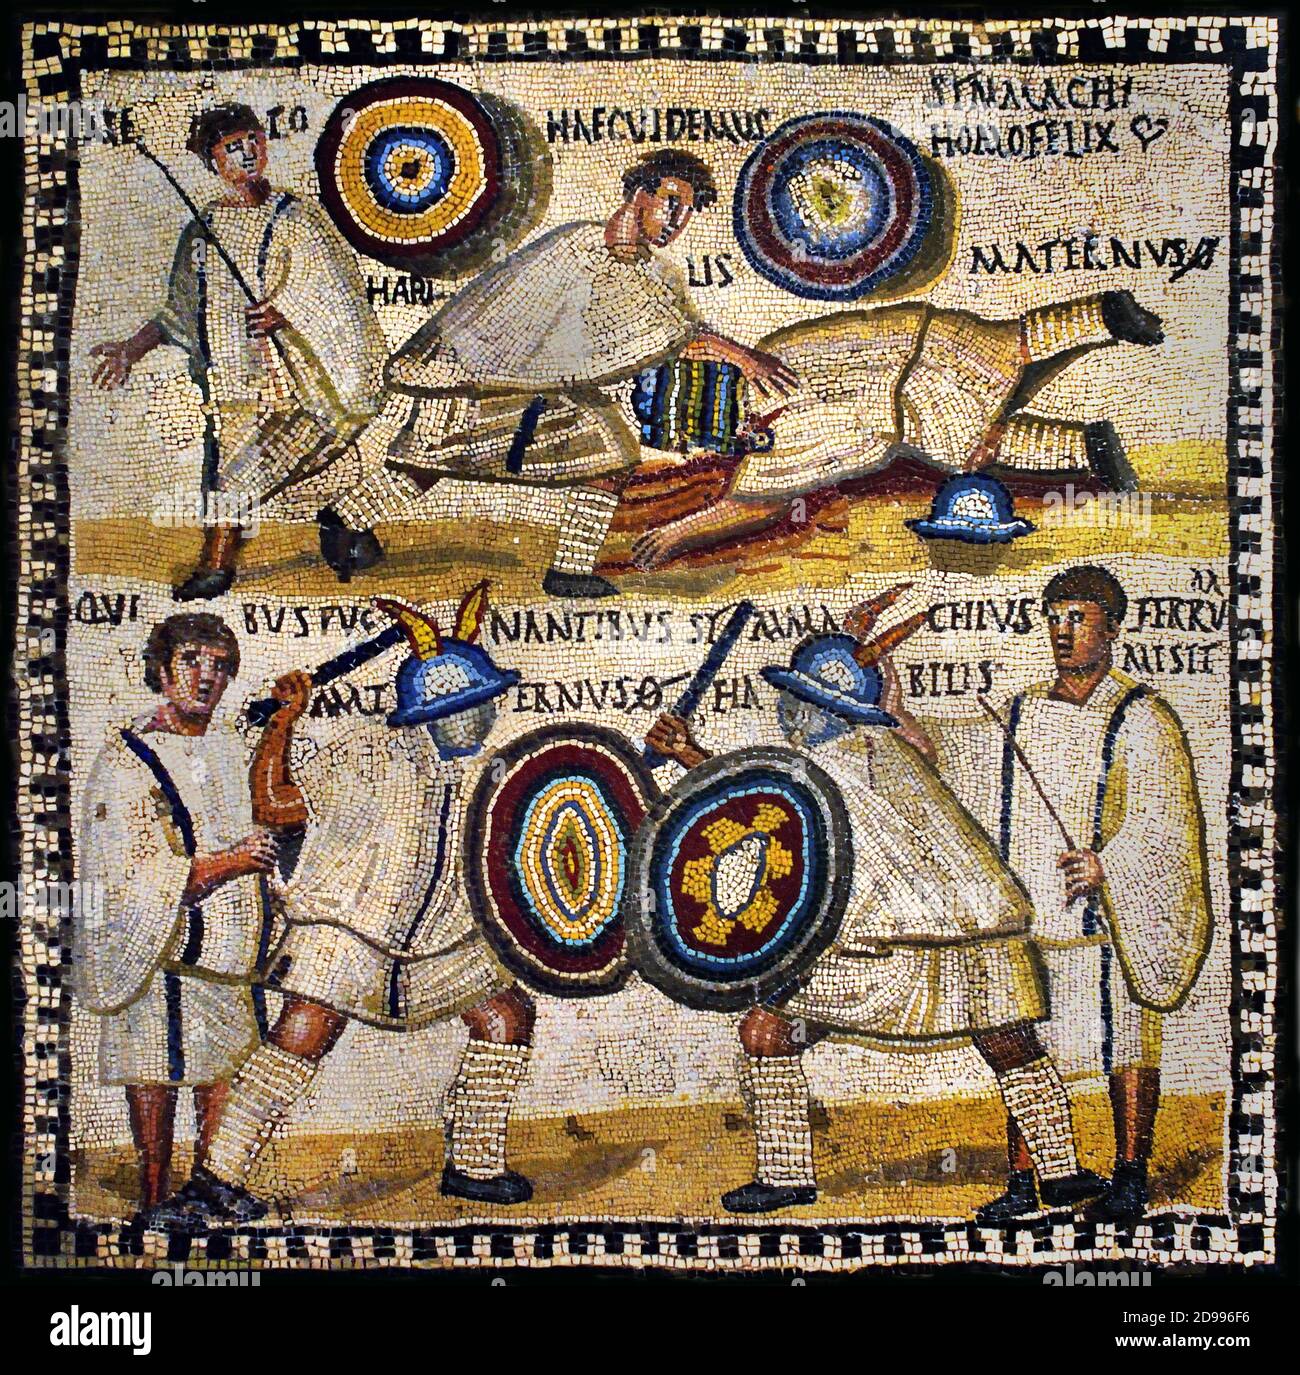 Gladiator fight depicted in the Roman mosaic from the 3rd century AD   According to the Latin inscription, the murmillo (Roman armed gladiator) Symmachus is fighting versus the murmillo Maternus, cheered on by the lanistae (gladiator trainers) National Archaeological Museum Spain. Stock Photo